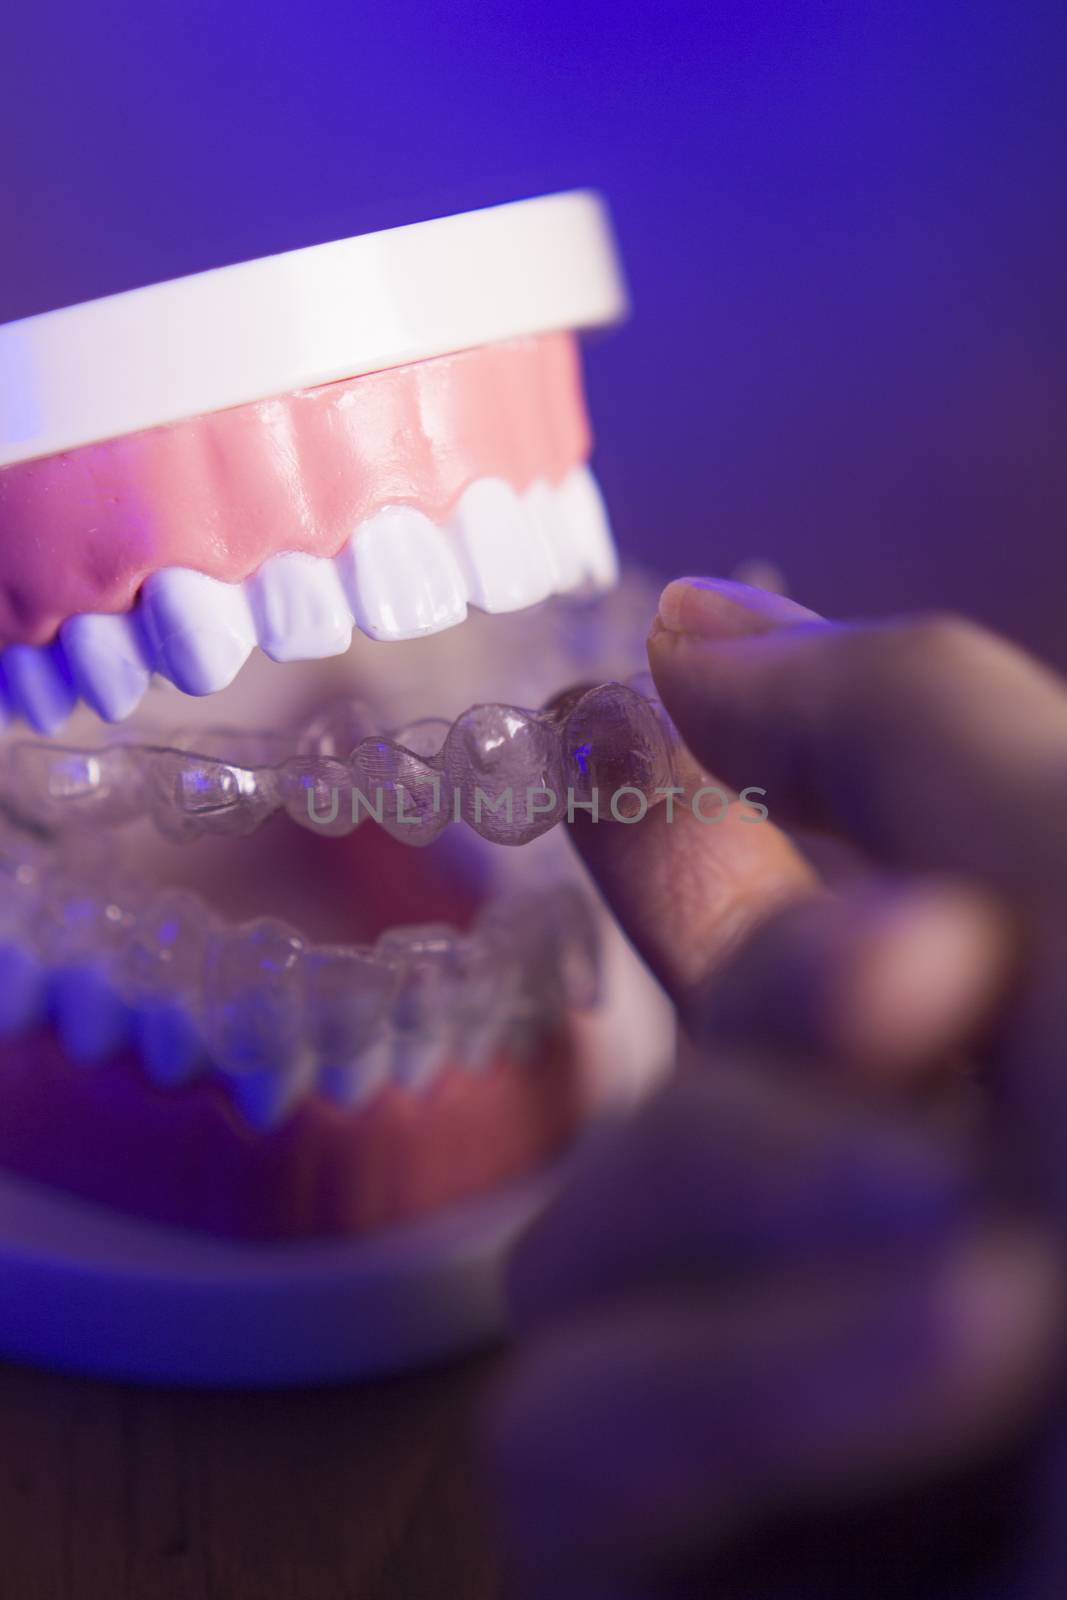 Denture with transparent orthodontics by GemaIbarra